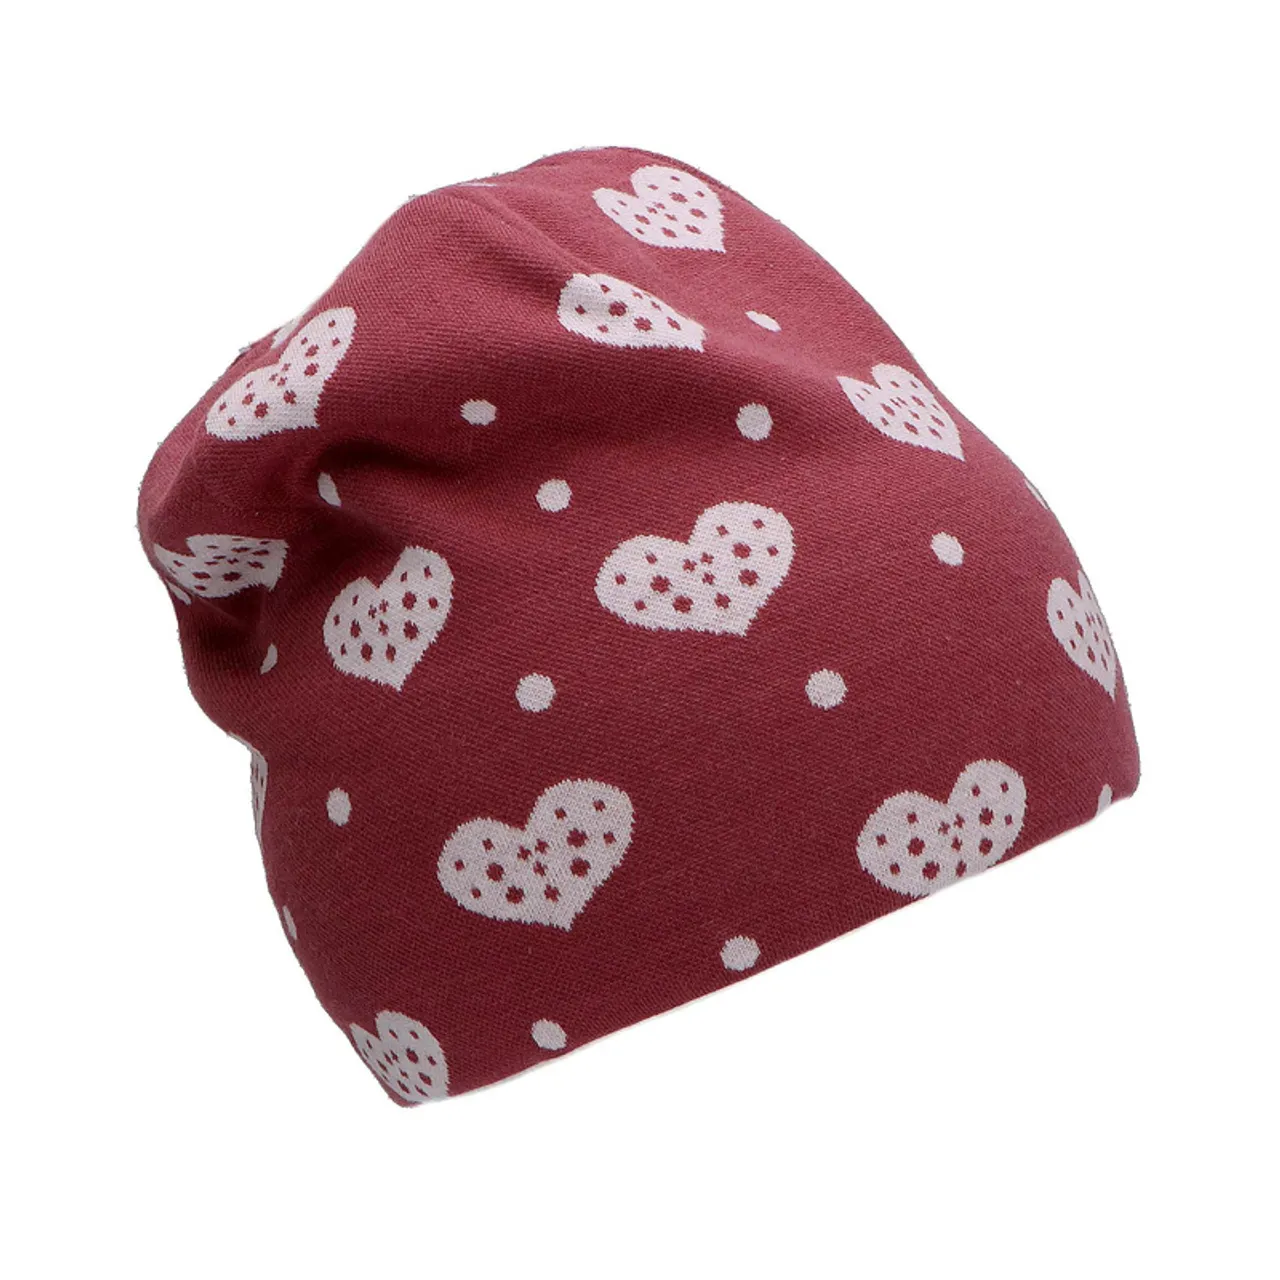 Beanie SLOUCH HEARTS in pink